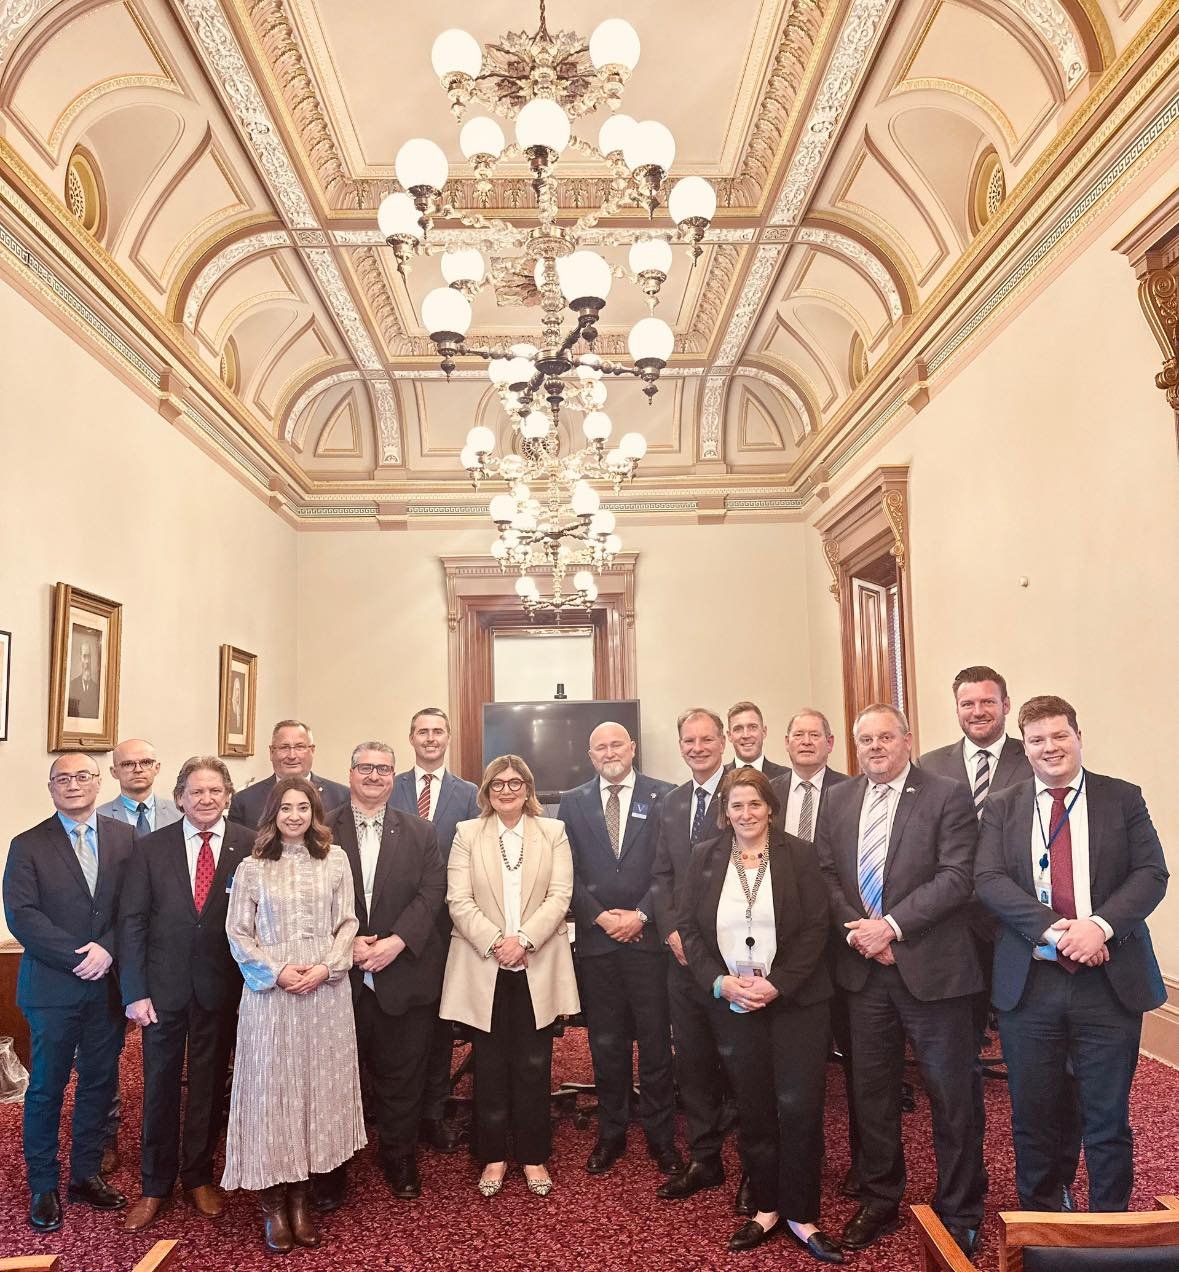 Last sitting week, I had the opportunity to meet the Ambassador of Poland to Australia, His Excellency Dr Maciej Chmielinski, at the establishment of the Parliamentary Friends of Poland.

There we discussed the oversized and significant contribution 